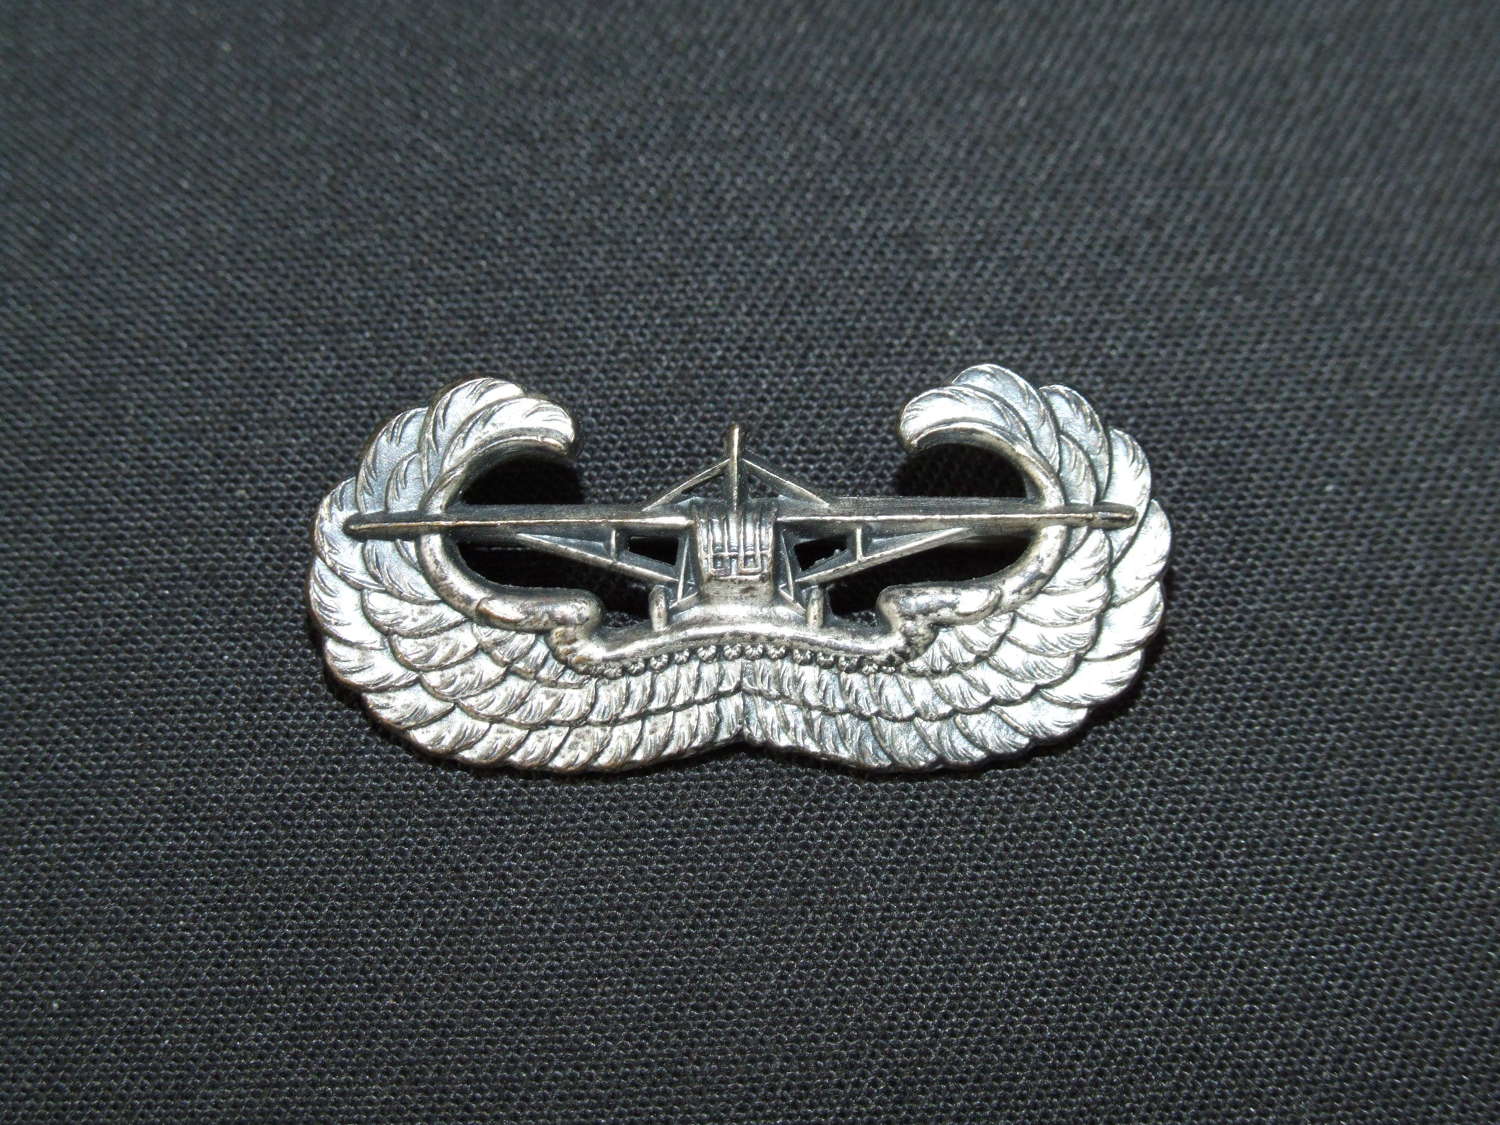 Glider Pilot's Badge for US Army Airborne Division